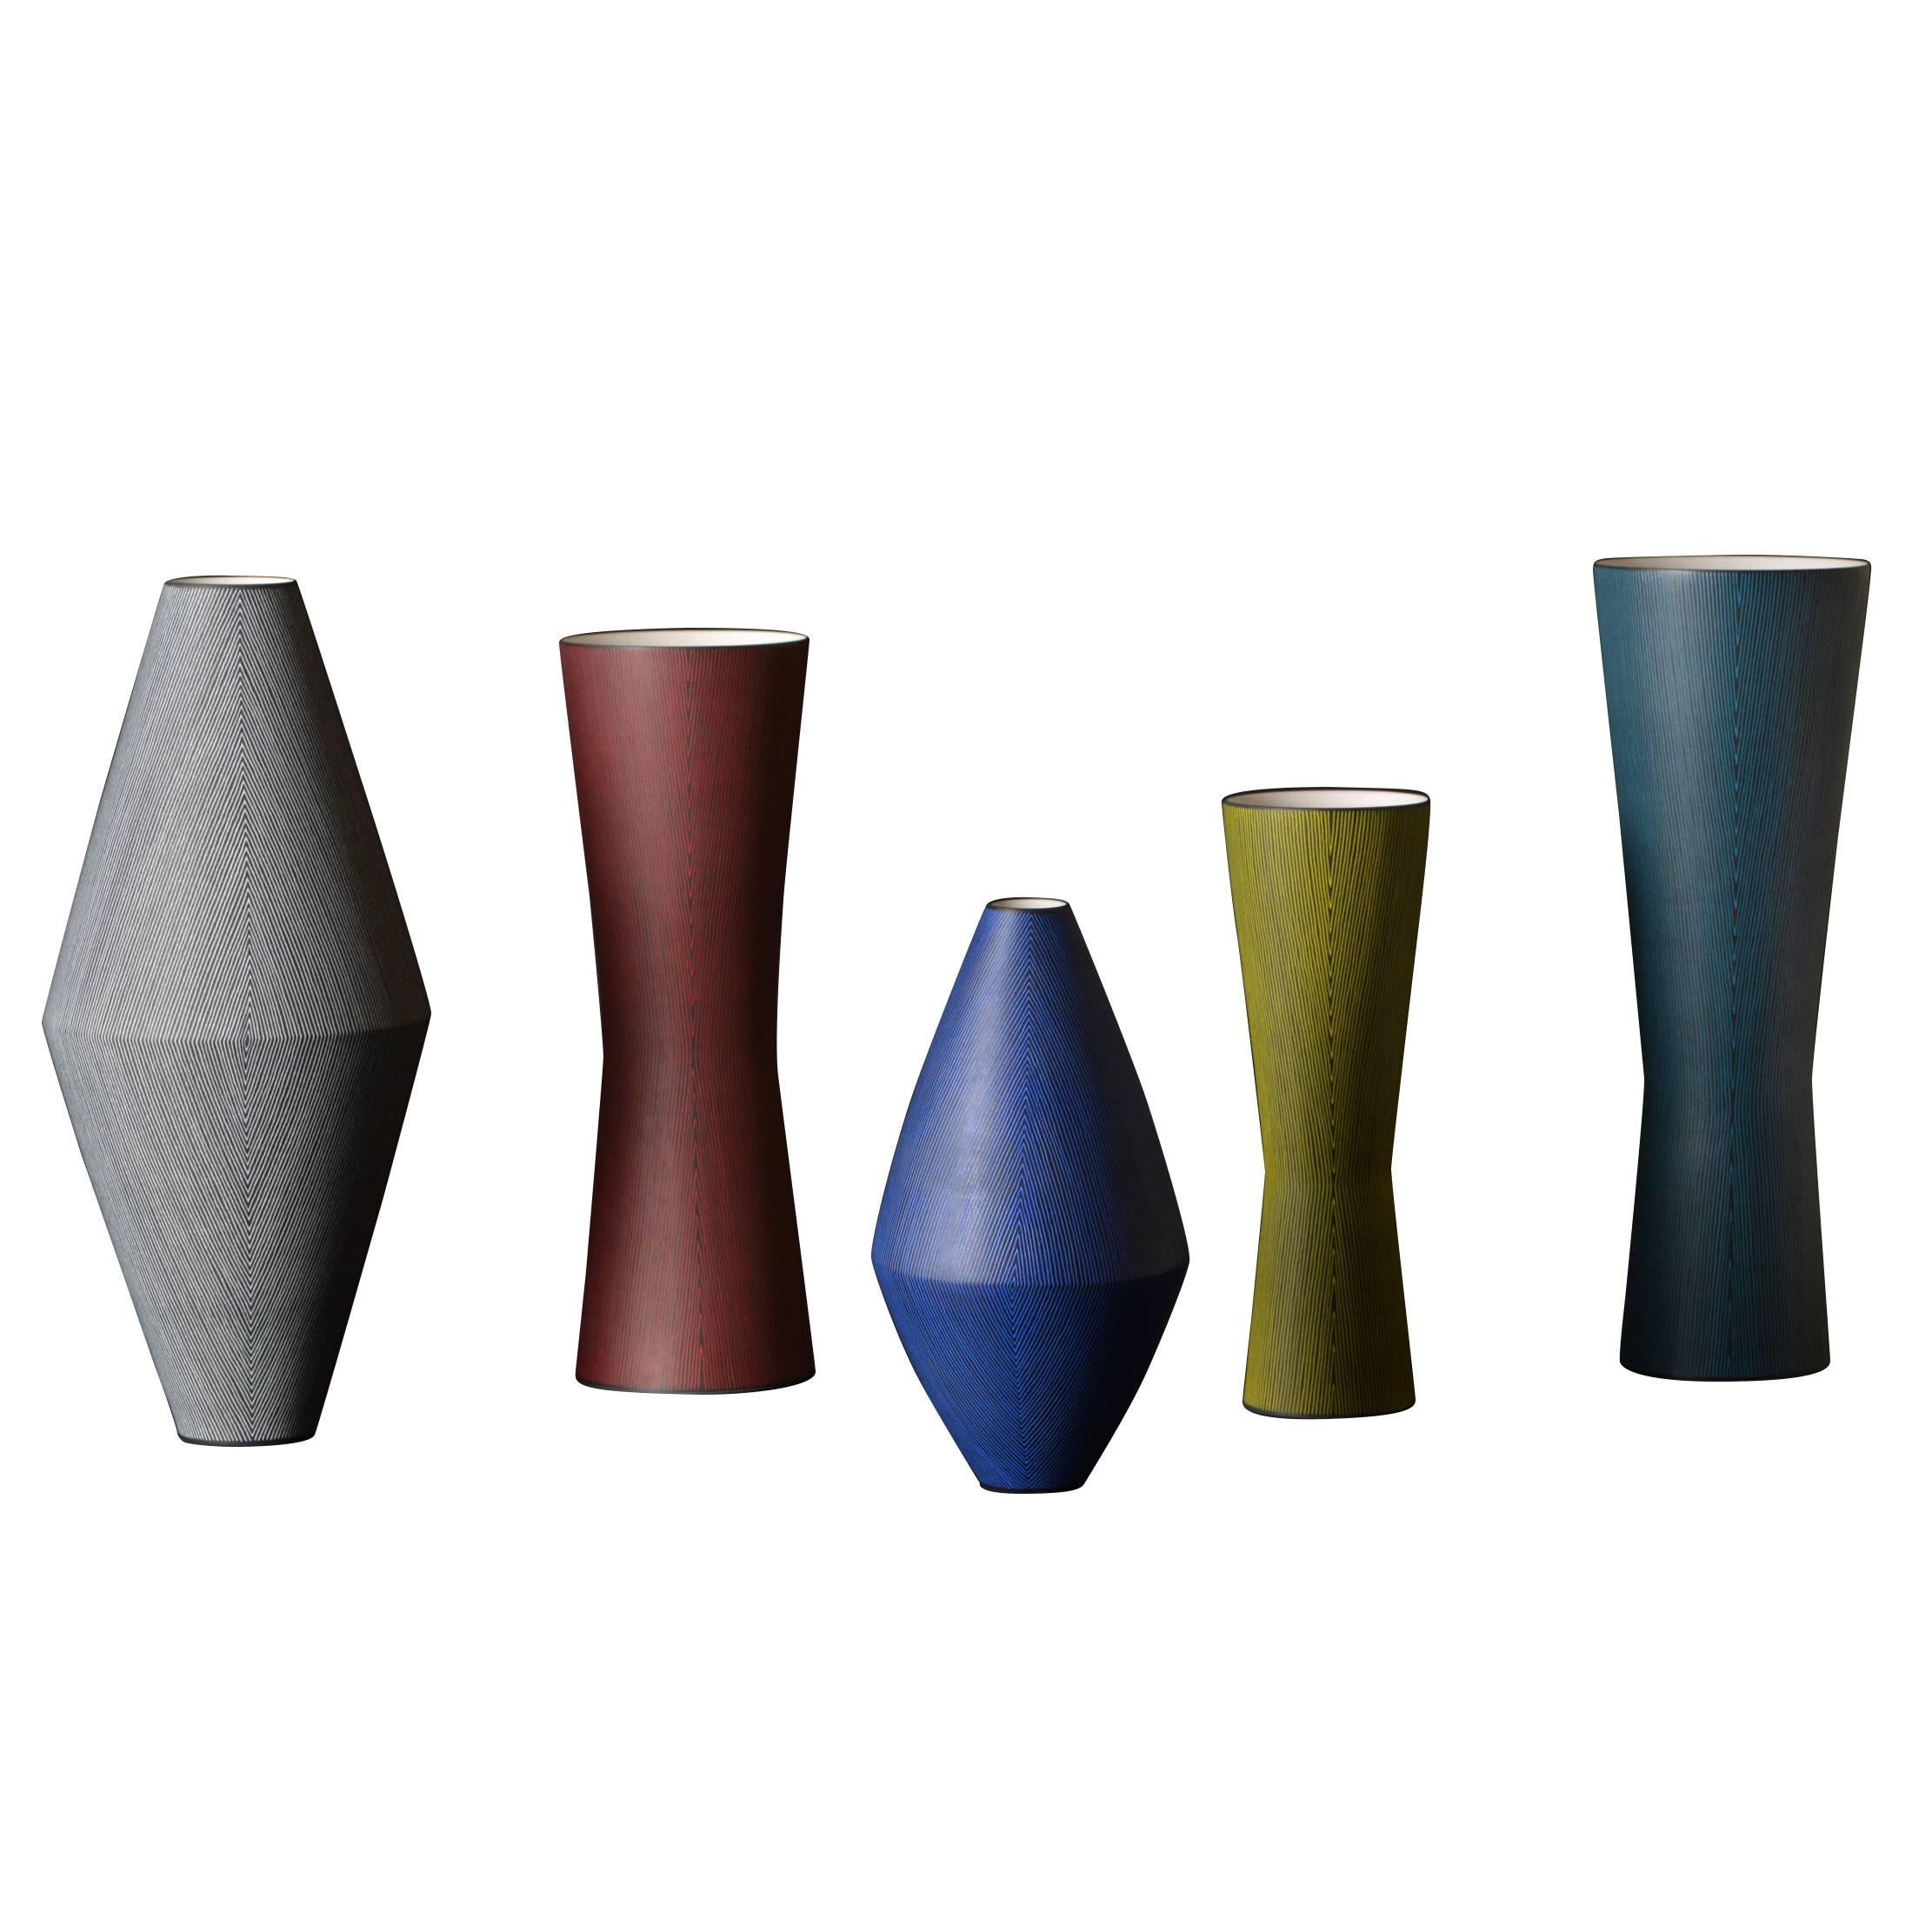 Group of Five Contemporary Porcelain Vases by Japanese Artist Masaru Nakada